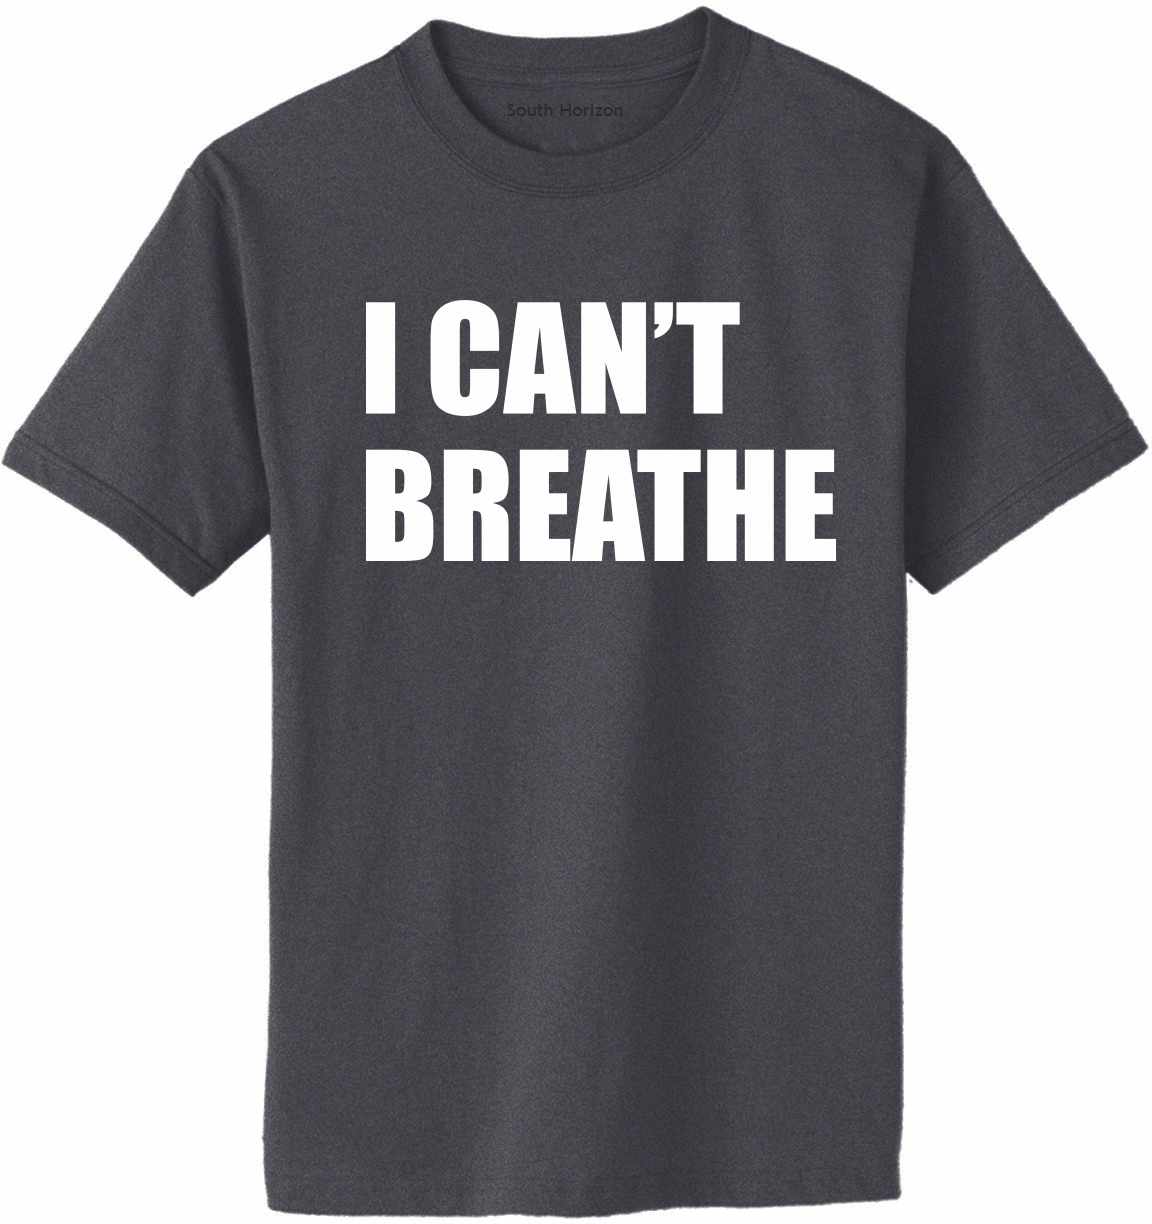 I Can't Breathe Adult T-Shirt (#1128-1)